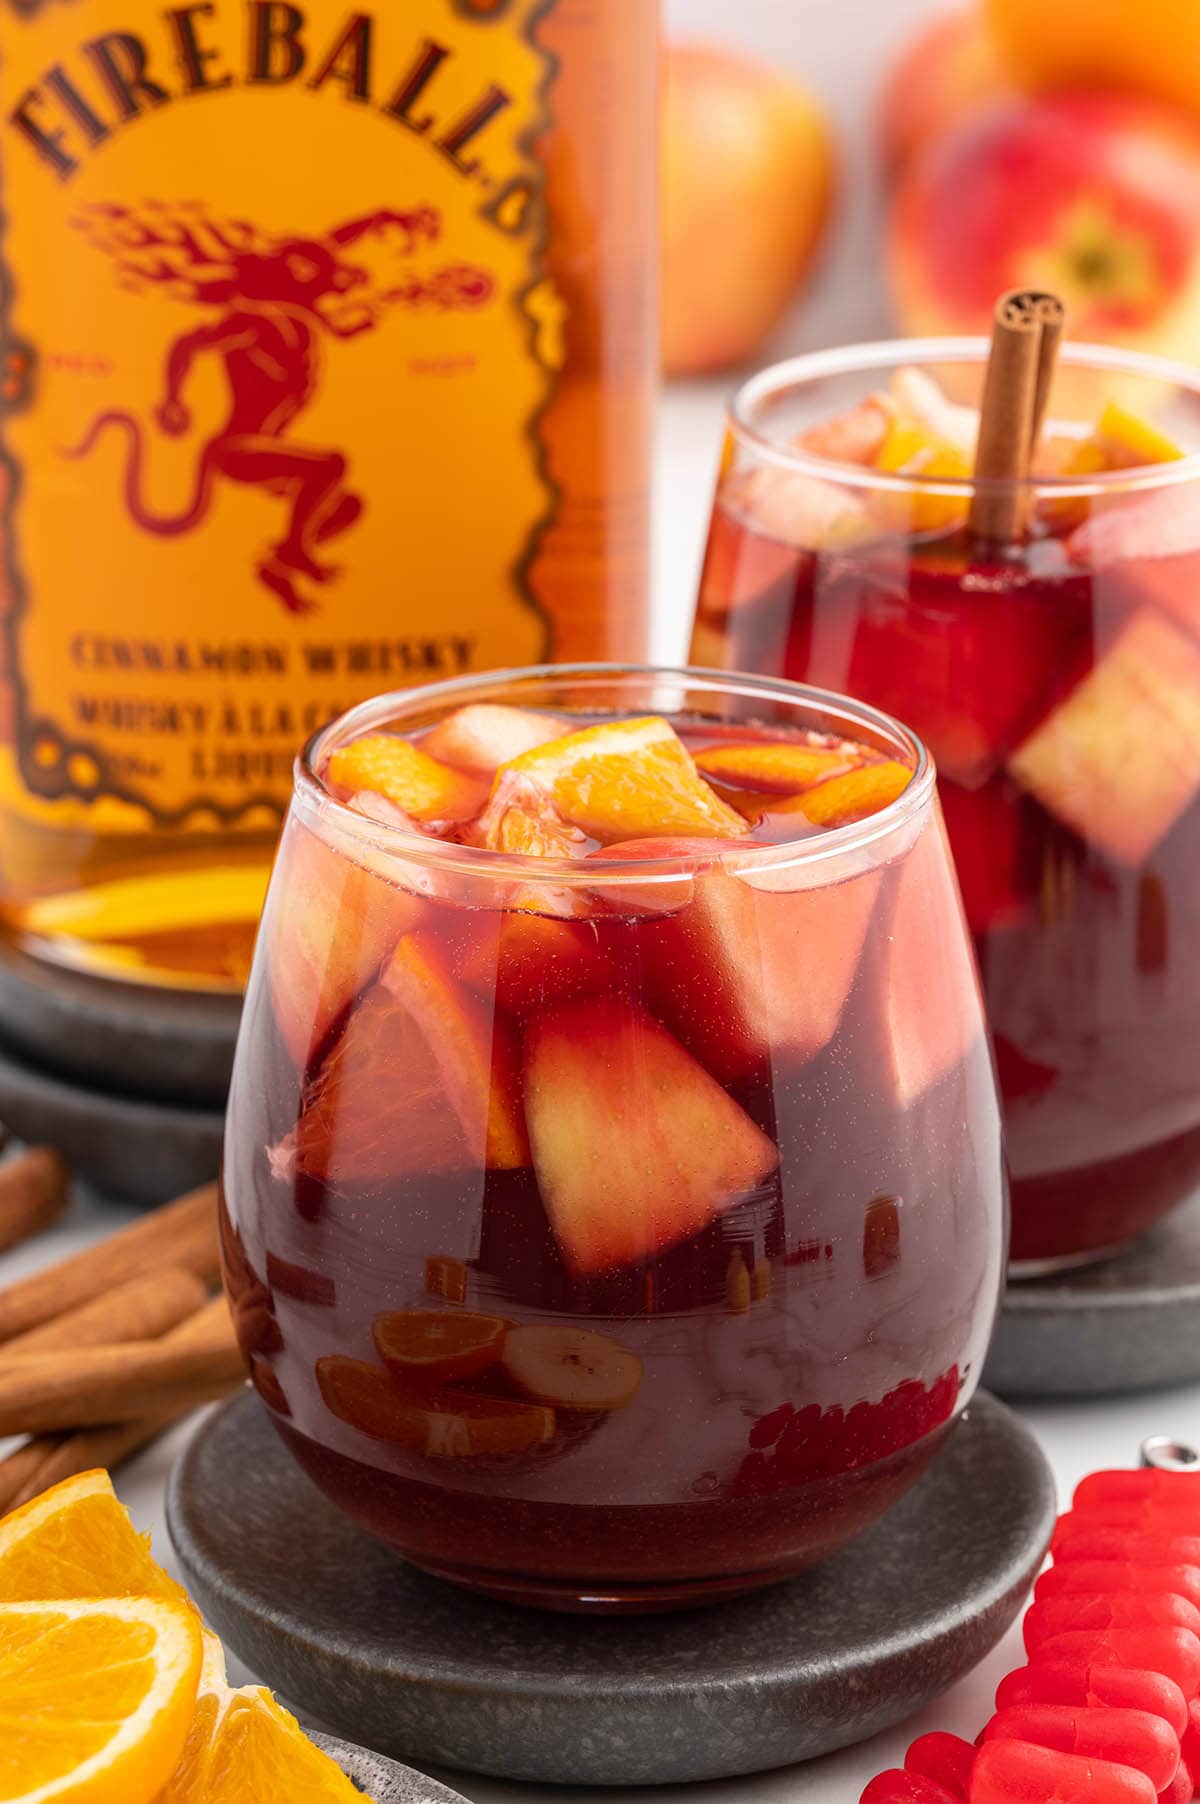 Fireball Sangria garnished with fruit slices.